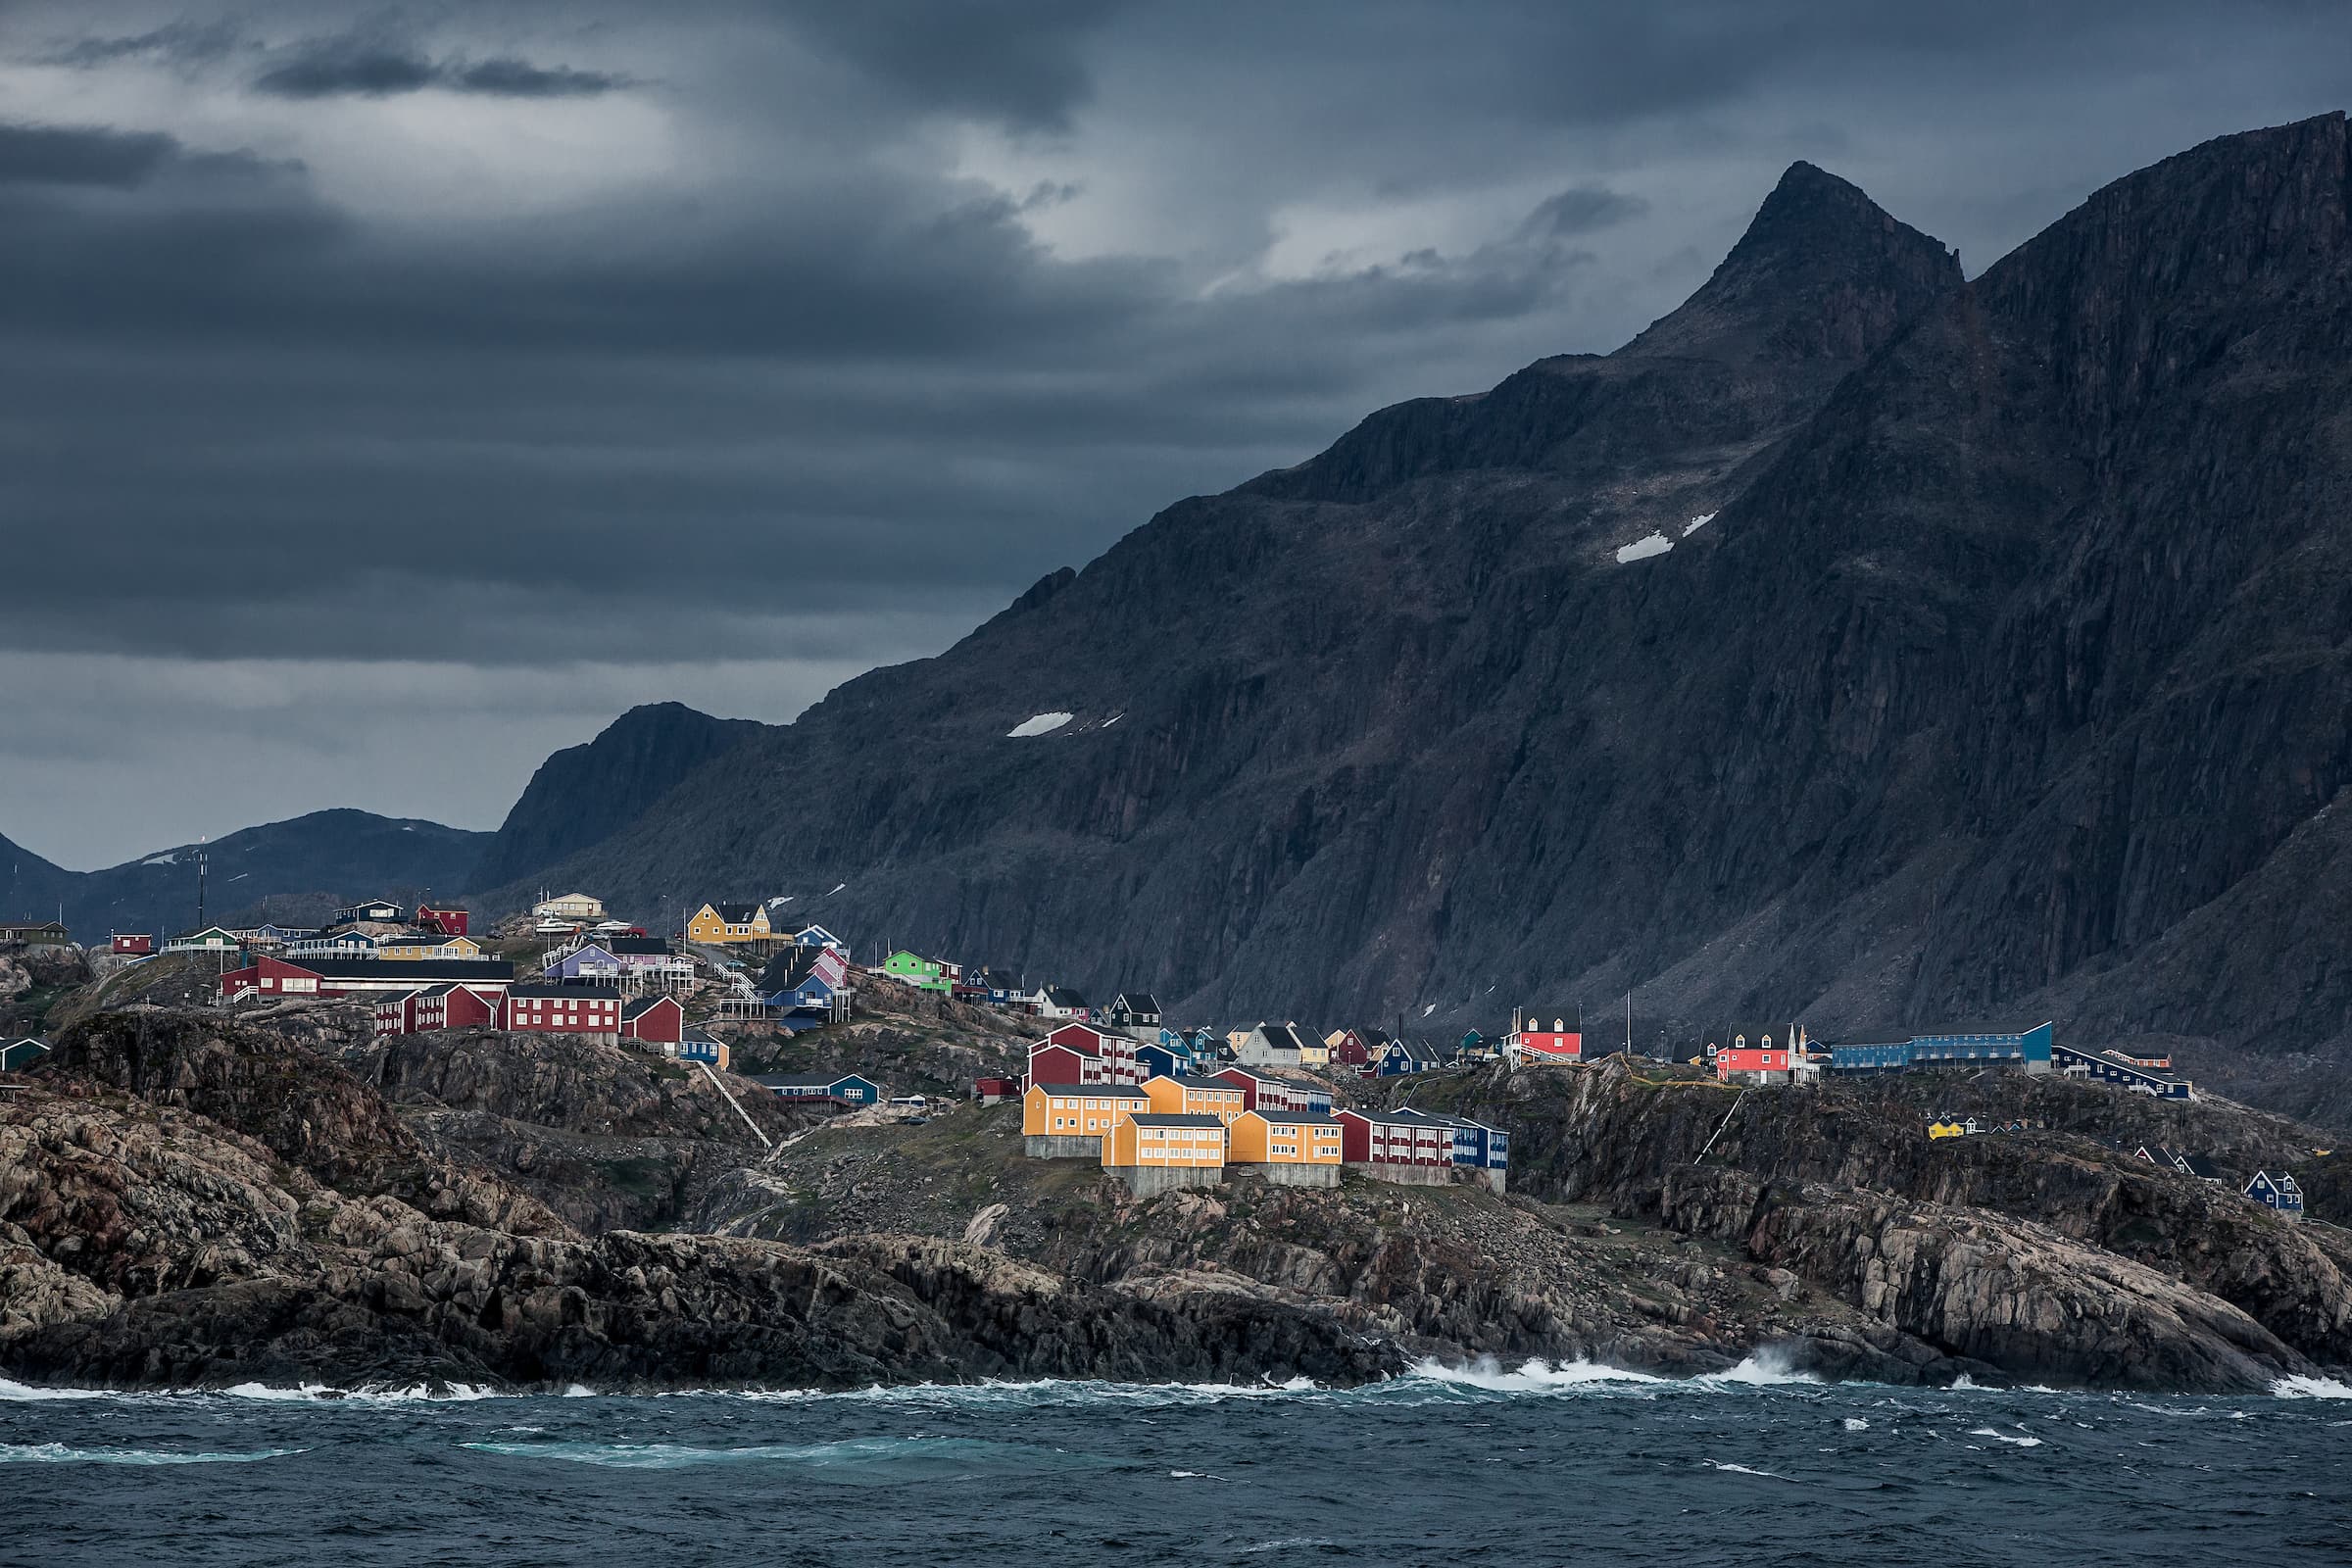 A windy and cloudy day in Sisimiut in Greenland. By Mads Pihl